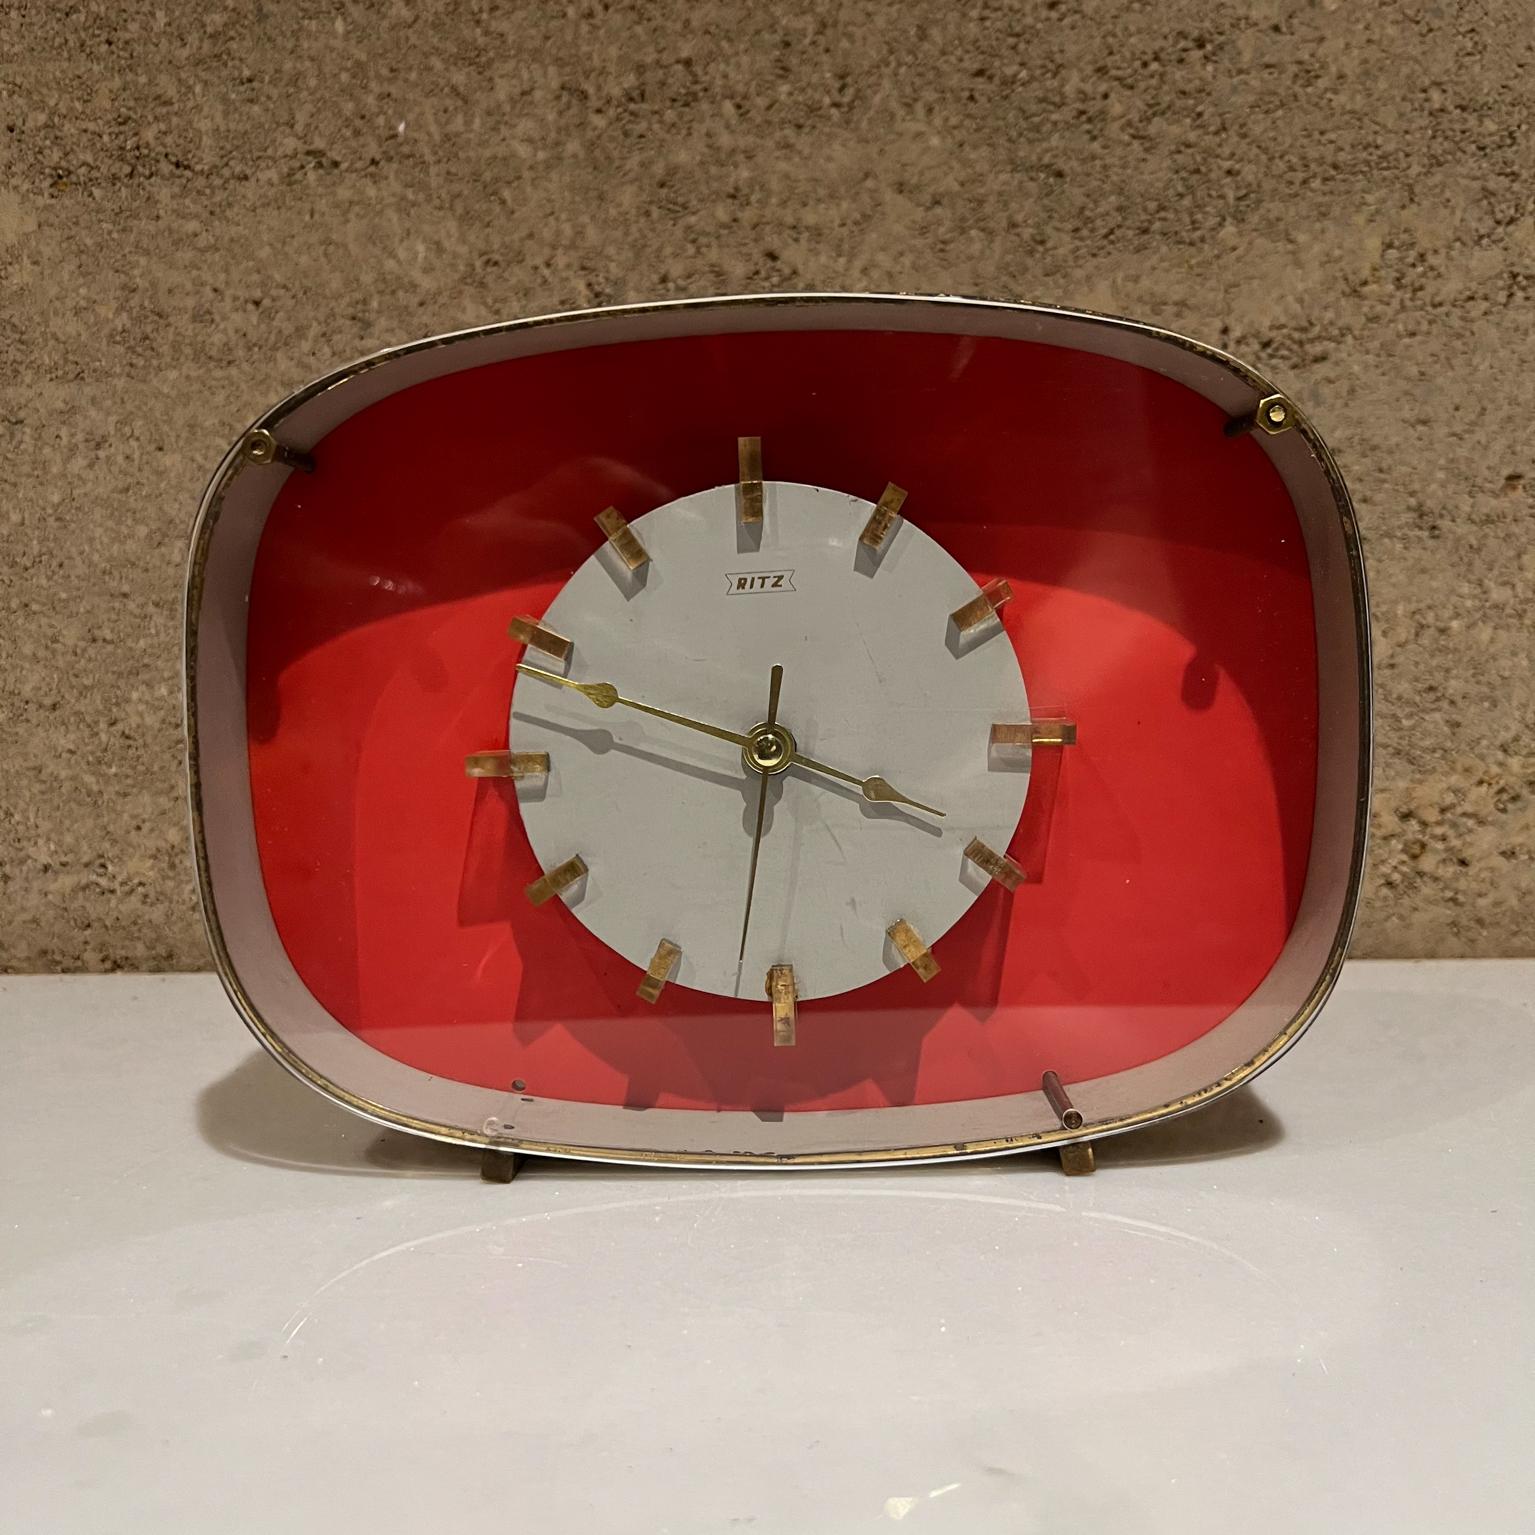 Art Deco fabulous pink vintage table clock by RITZ made in ITALY 1960s
Mechanical Wind-up Alarm Desk Clock
Colors of Pink Salmon, White, Black, & Gold in Brass and Lucite Plexiglass.
Time markers have Lucite trim.
Table Clock legs are in solid